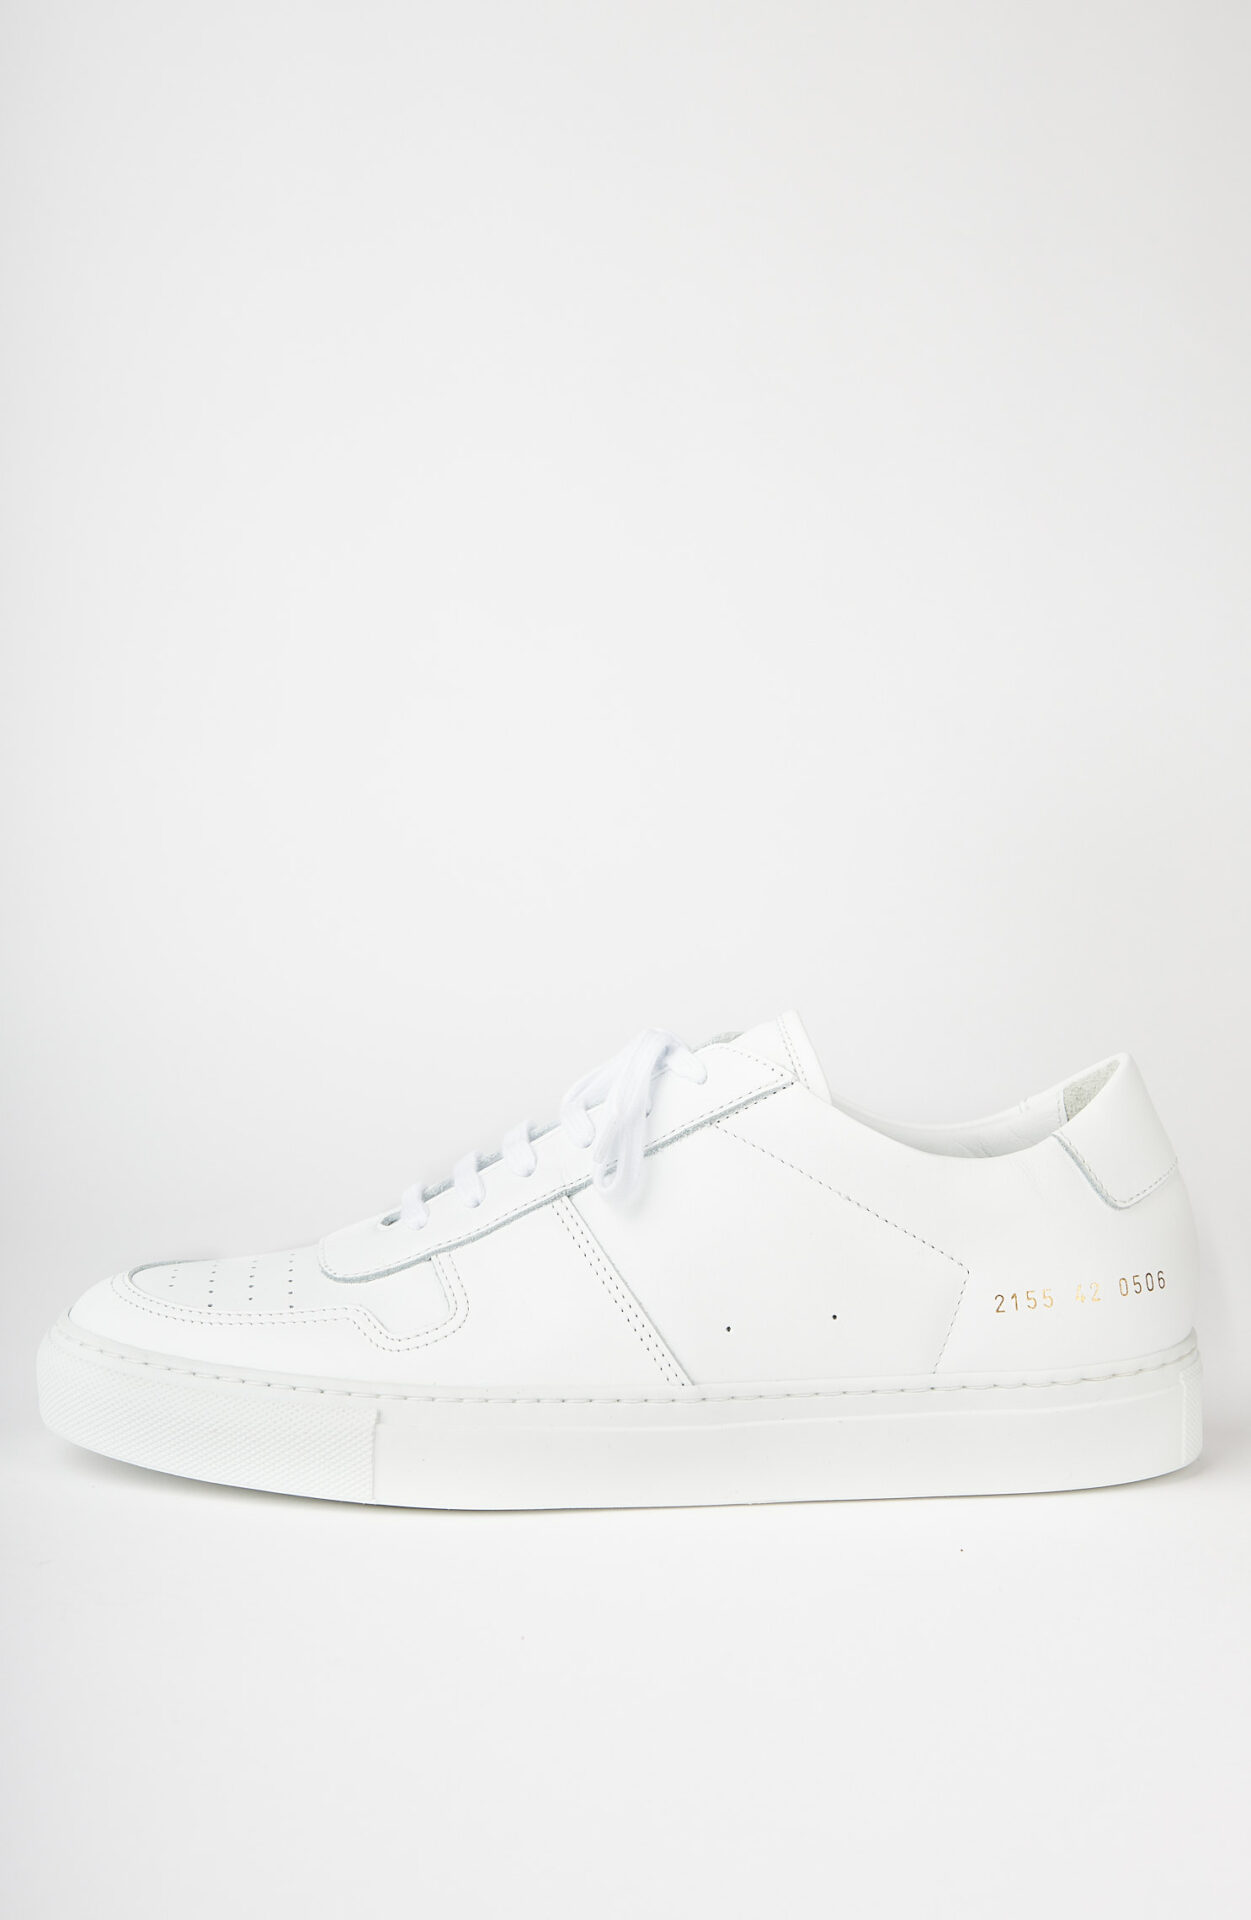 Common Projects - White sneaker 